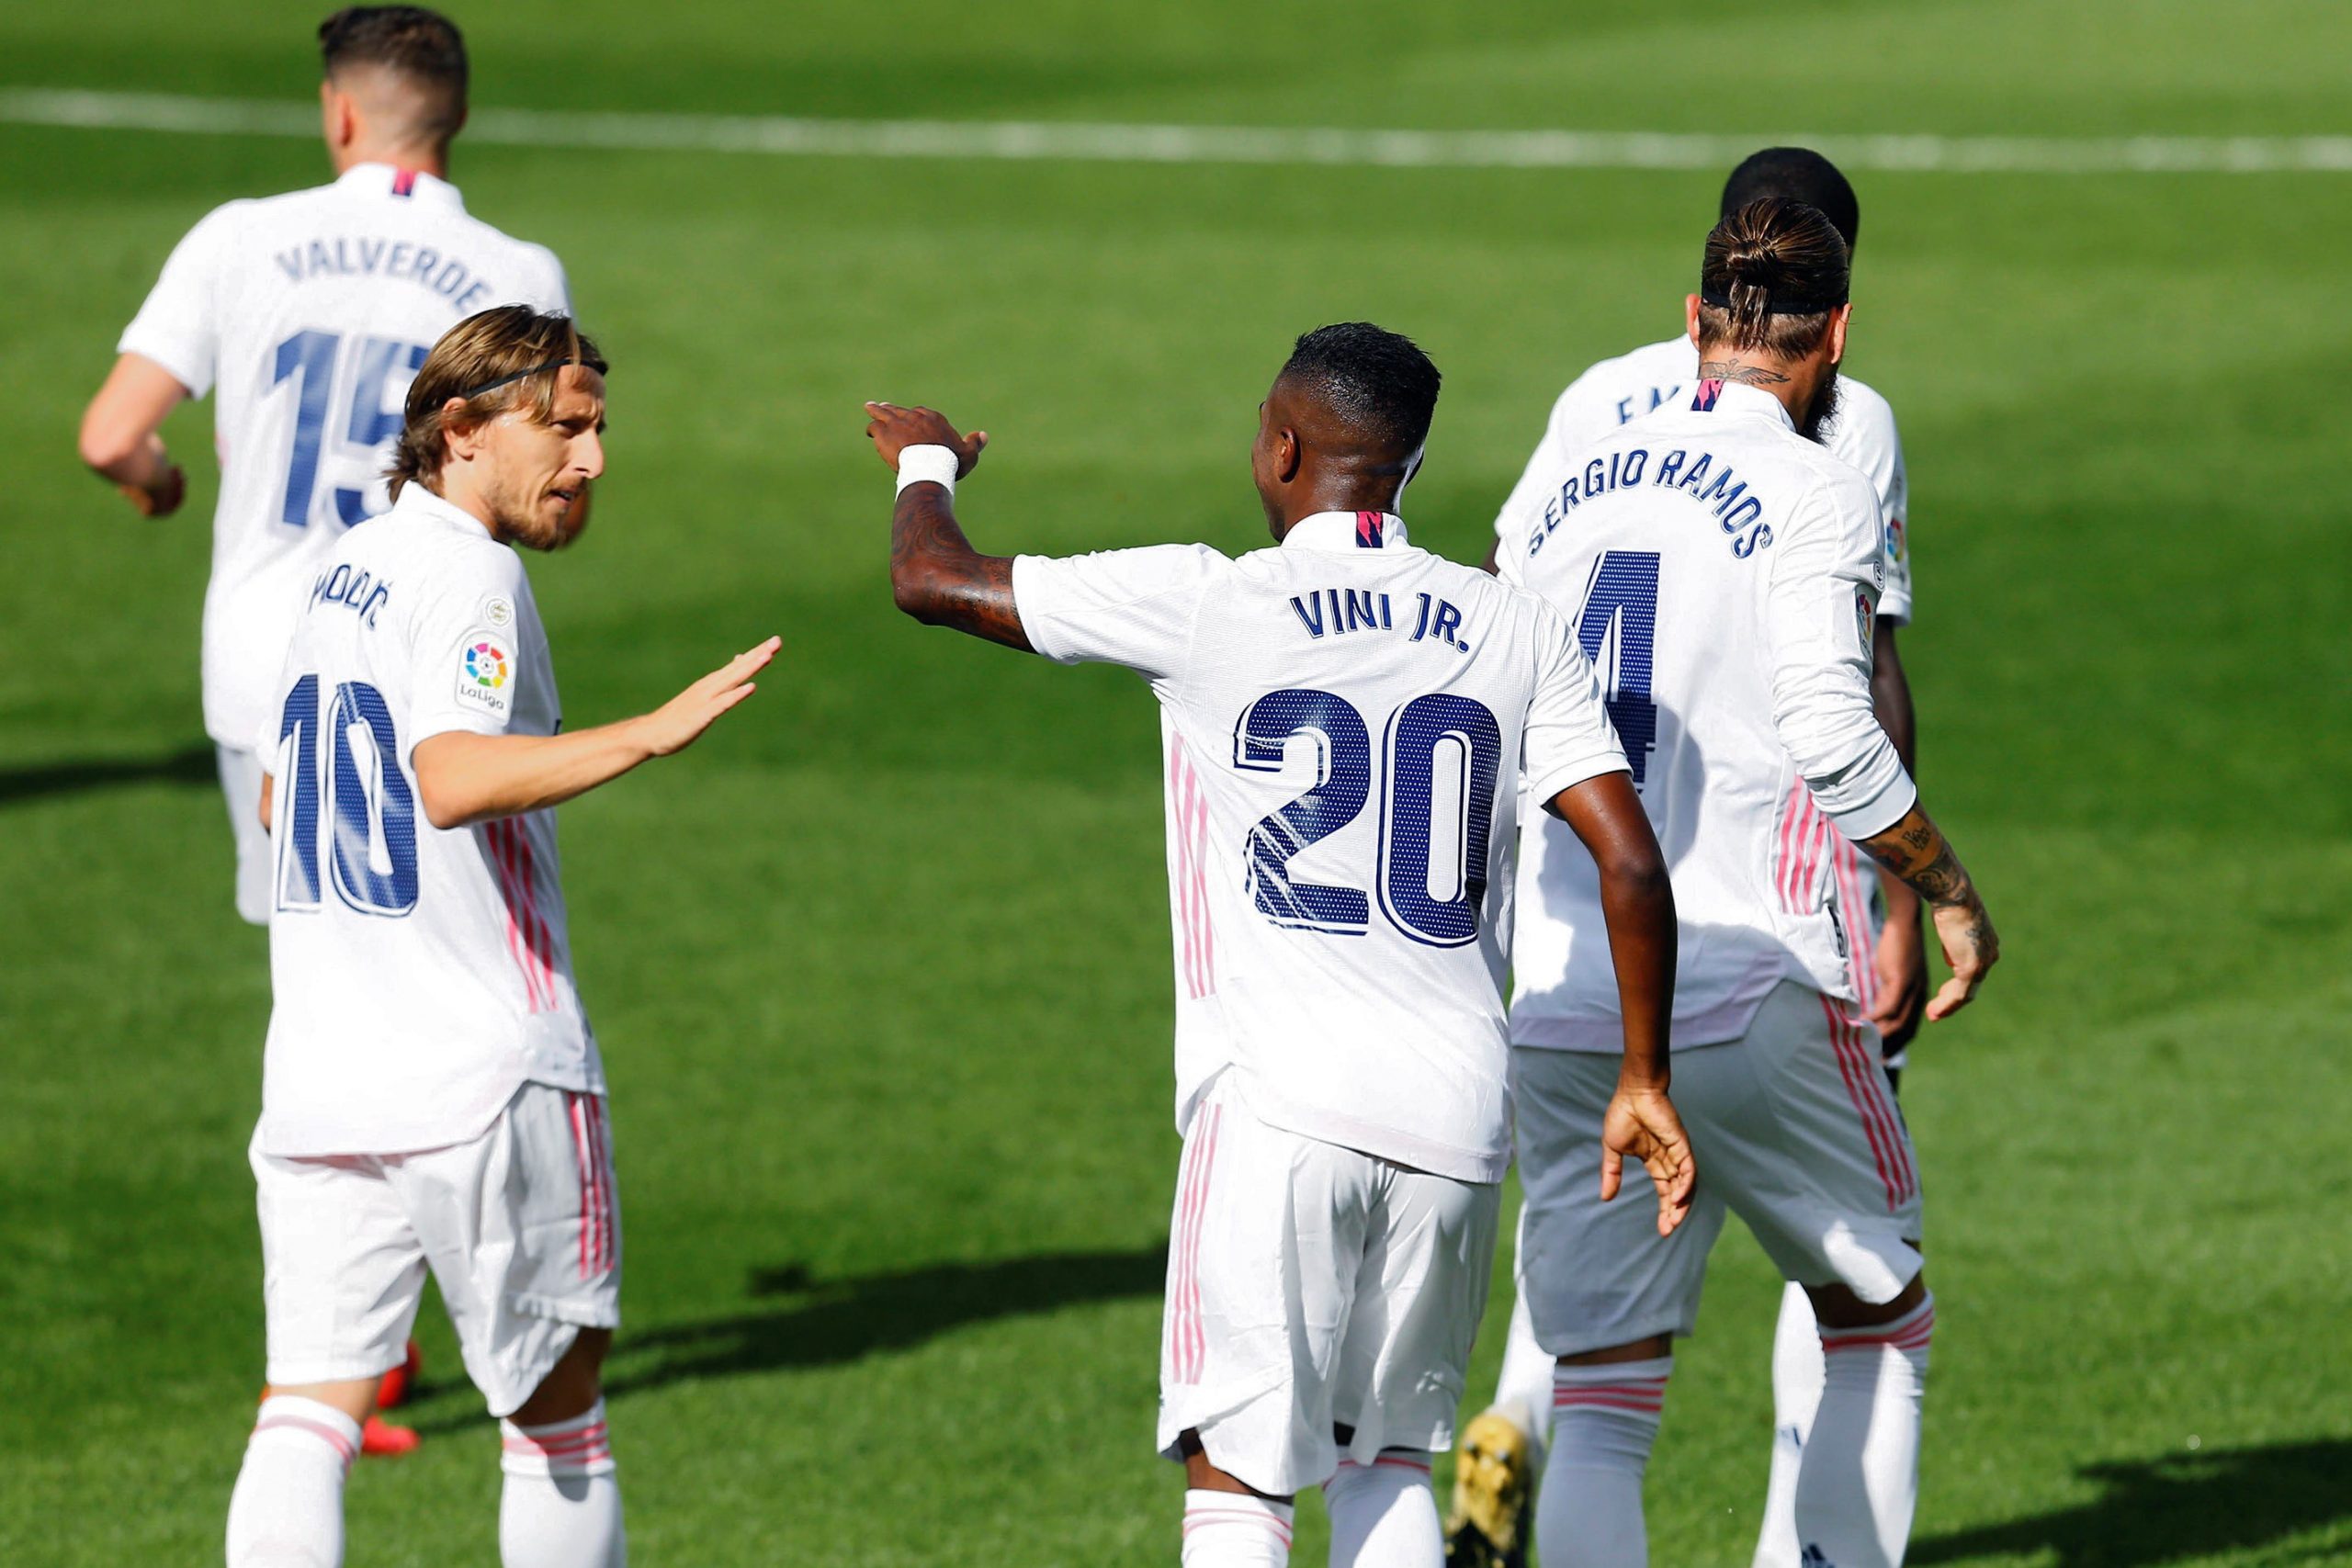 epa08720093 Real Madrid's Vinicius Jr. (C) celebrates with team mate Luka Modric (L)  after scoring the 1-0 lead during the Spanish LaLiga soccer match between UD Levante and Real Madrid at Ceramica stadium in Villarreal, eastern Spain, 04 October 2020.  EPA/DOMENENCH CASTELLO